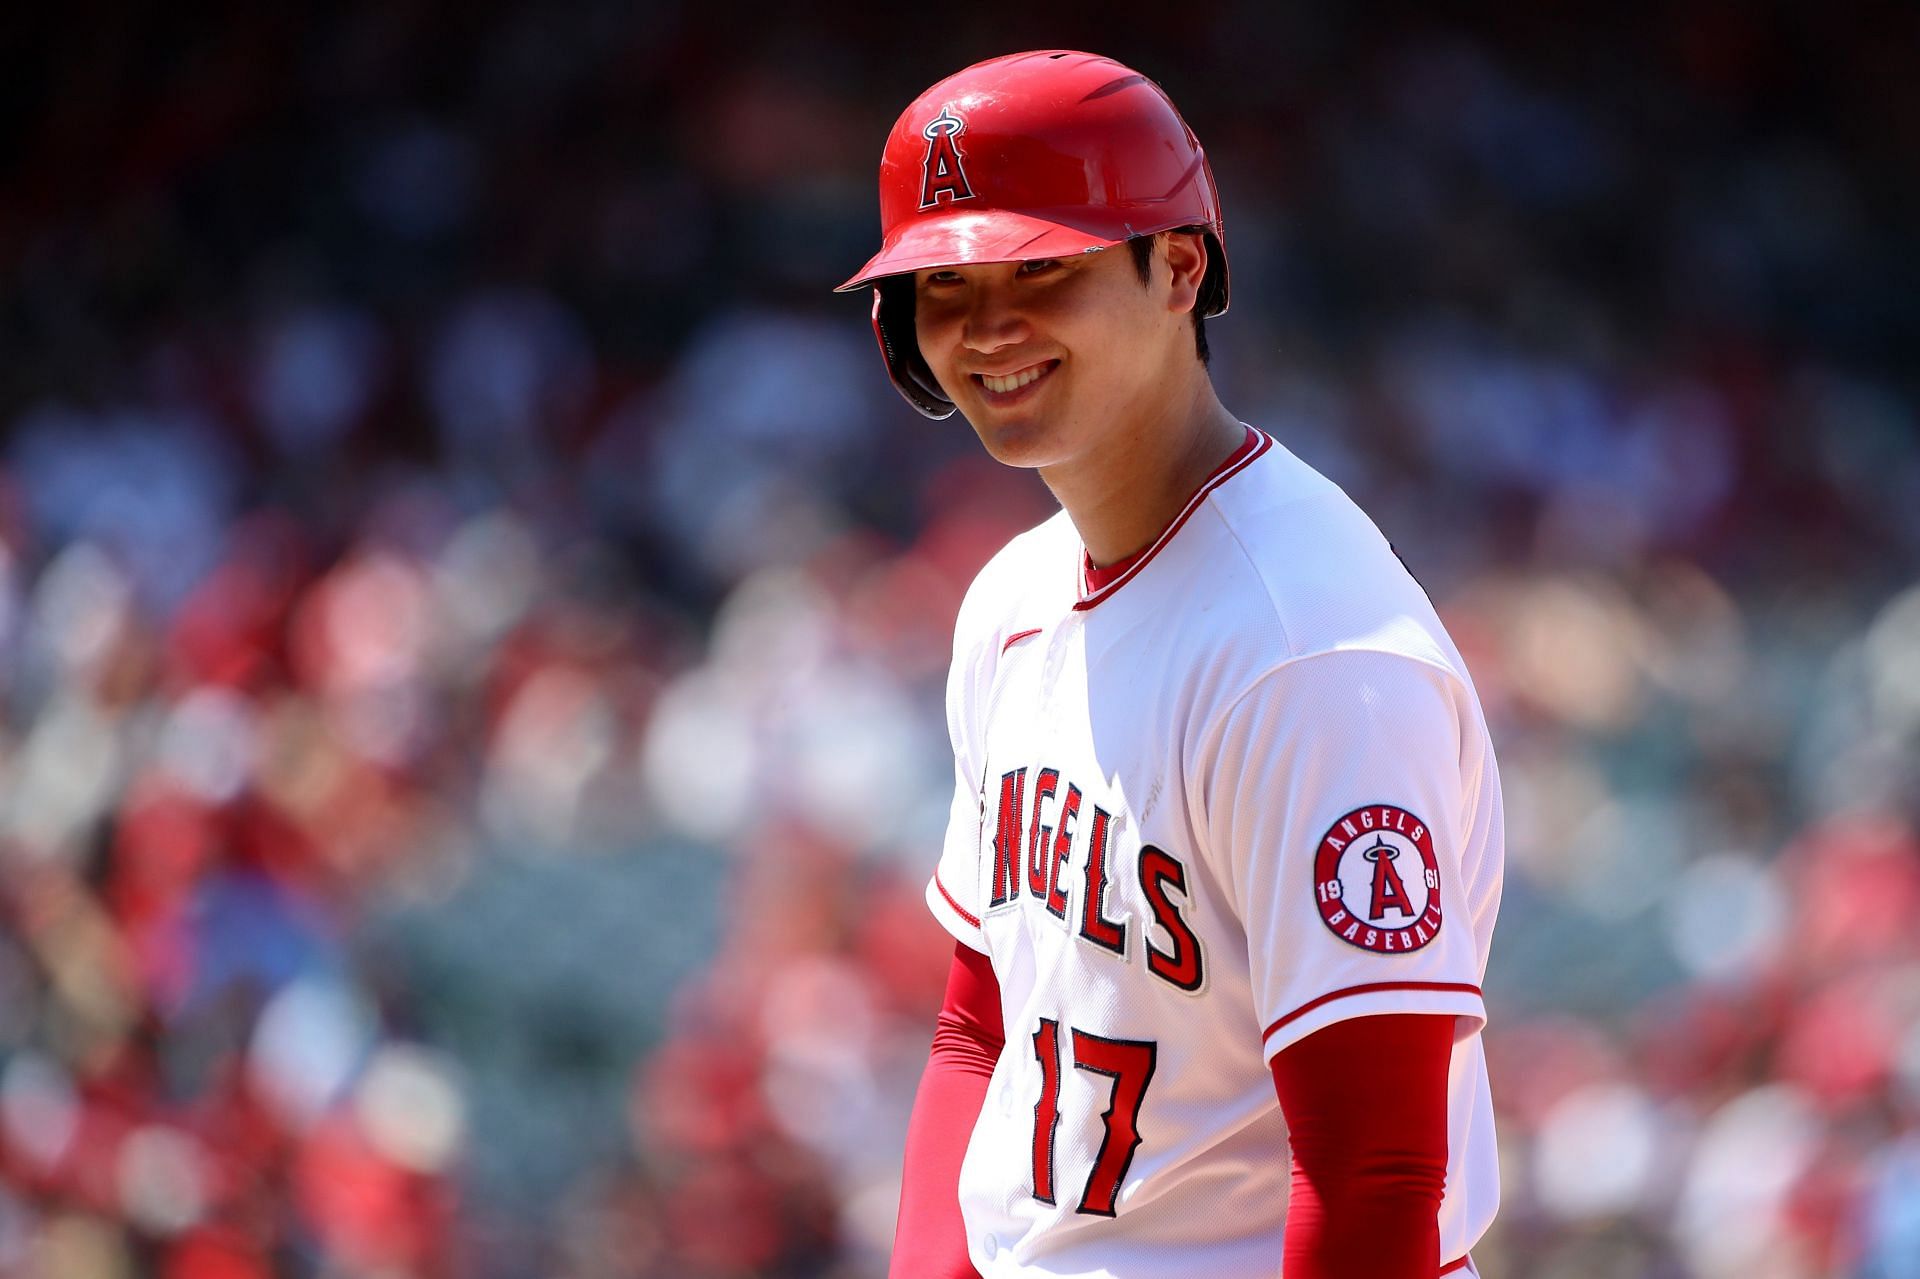 Will the Angels&#039; offseason additions to the pitching rotation help Ohtani?